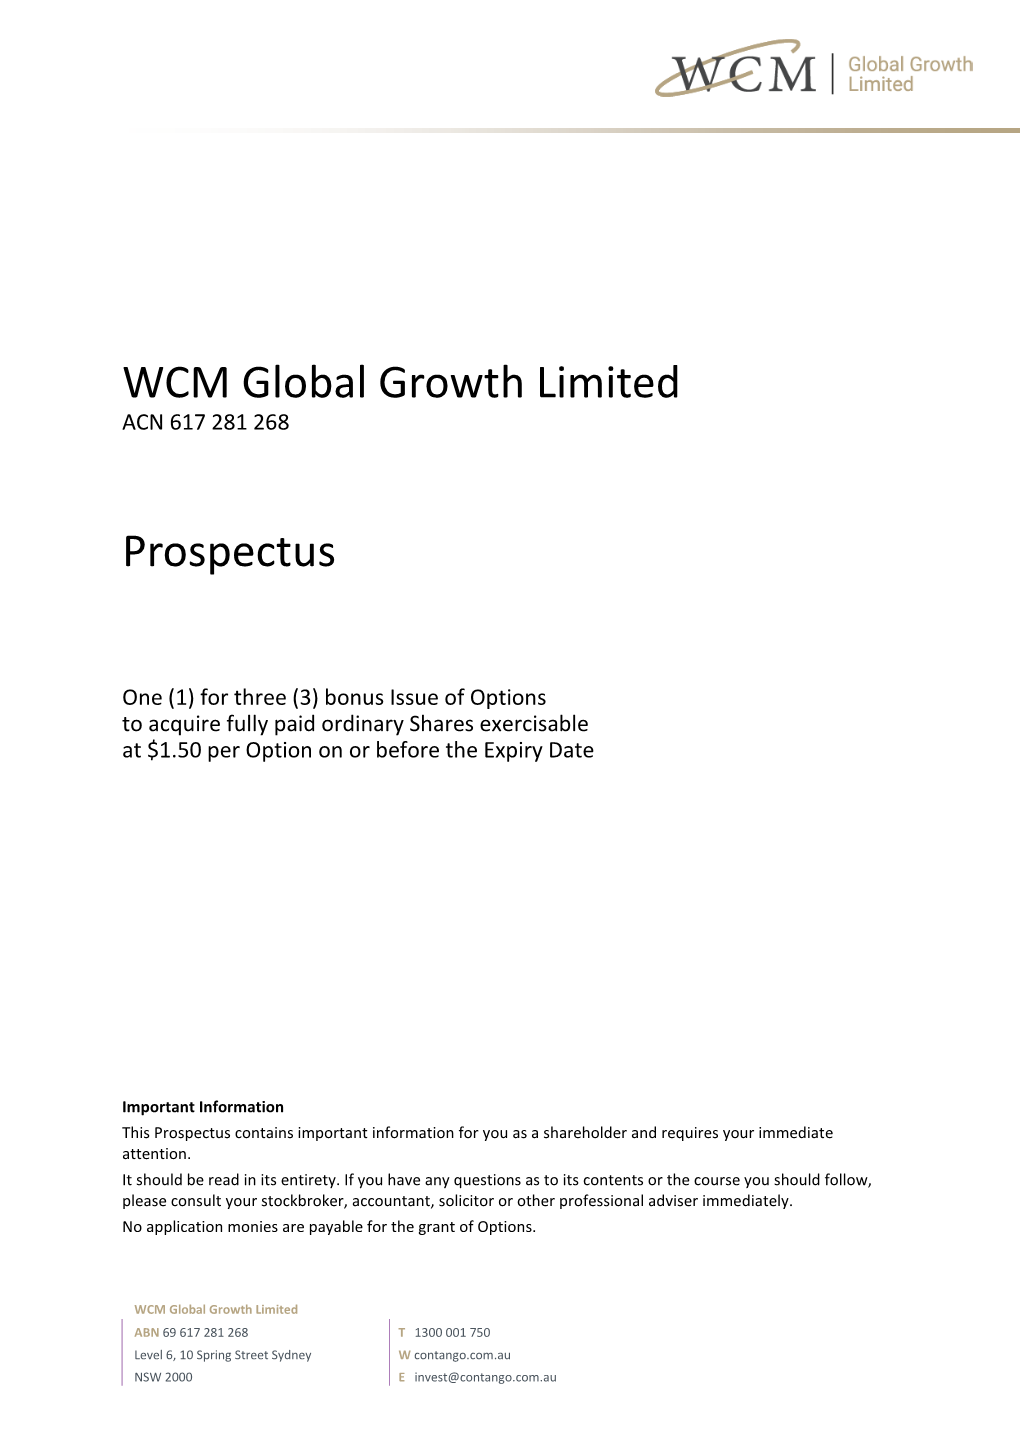 WCM Global Growth Limited Prospectus